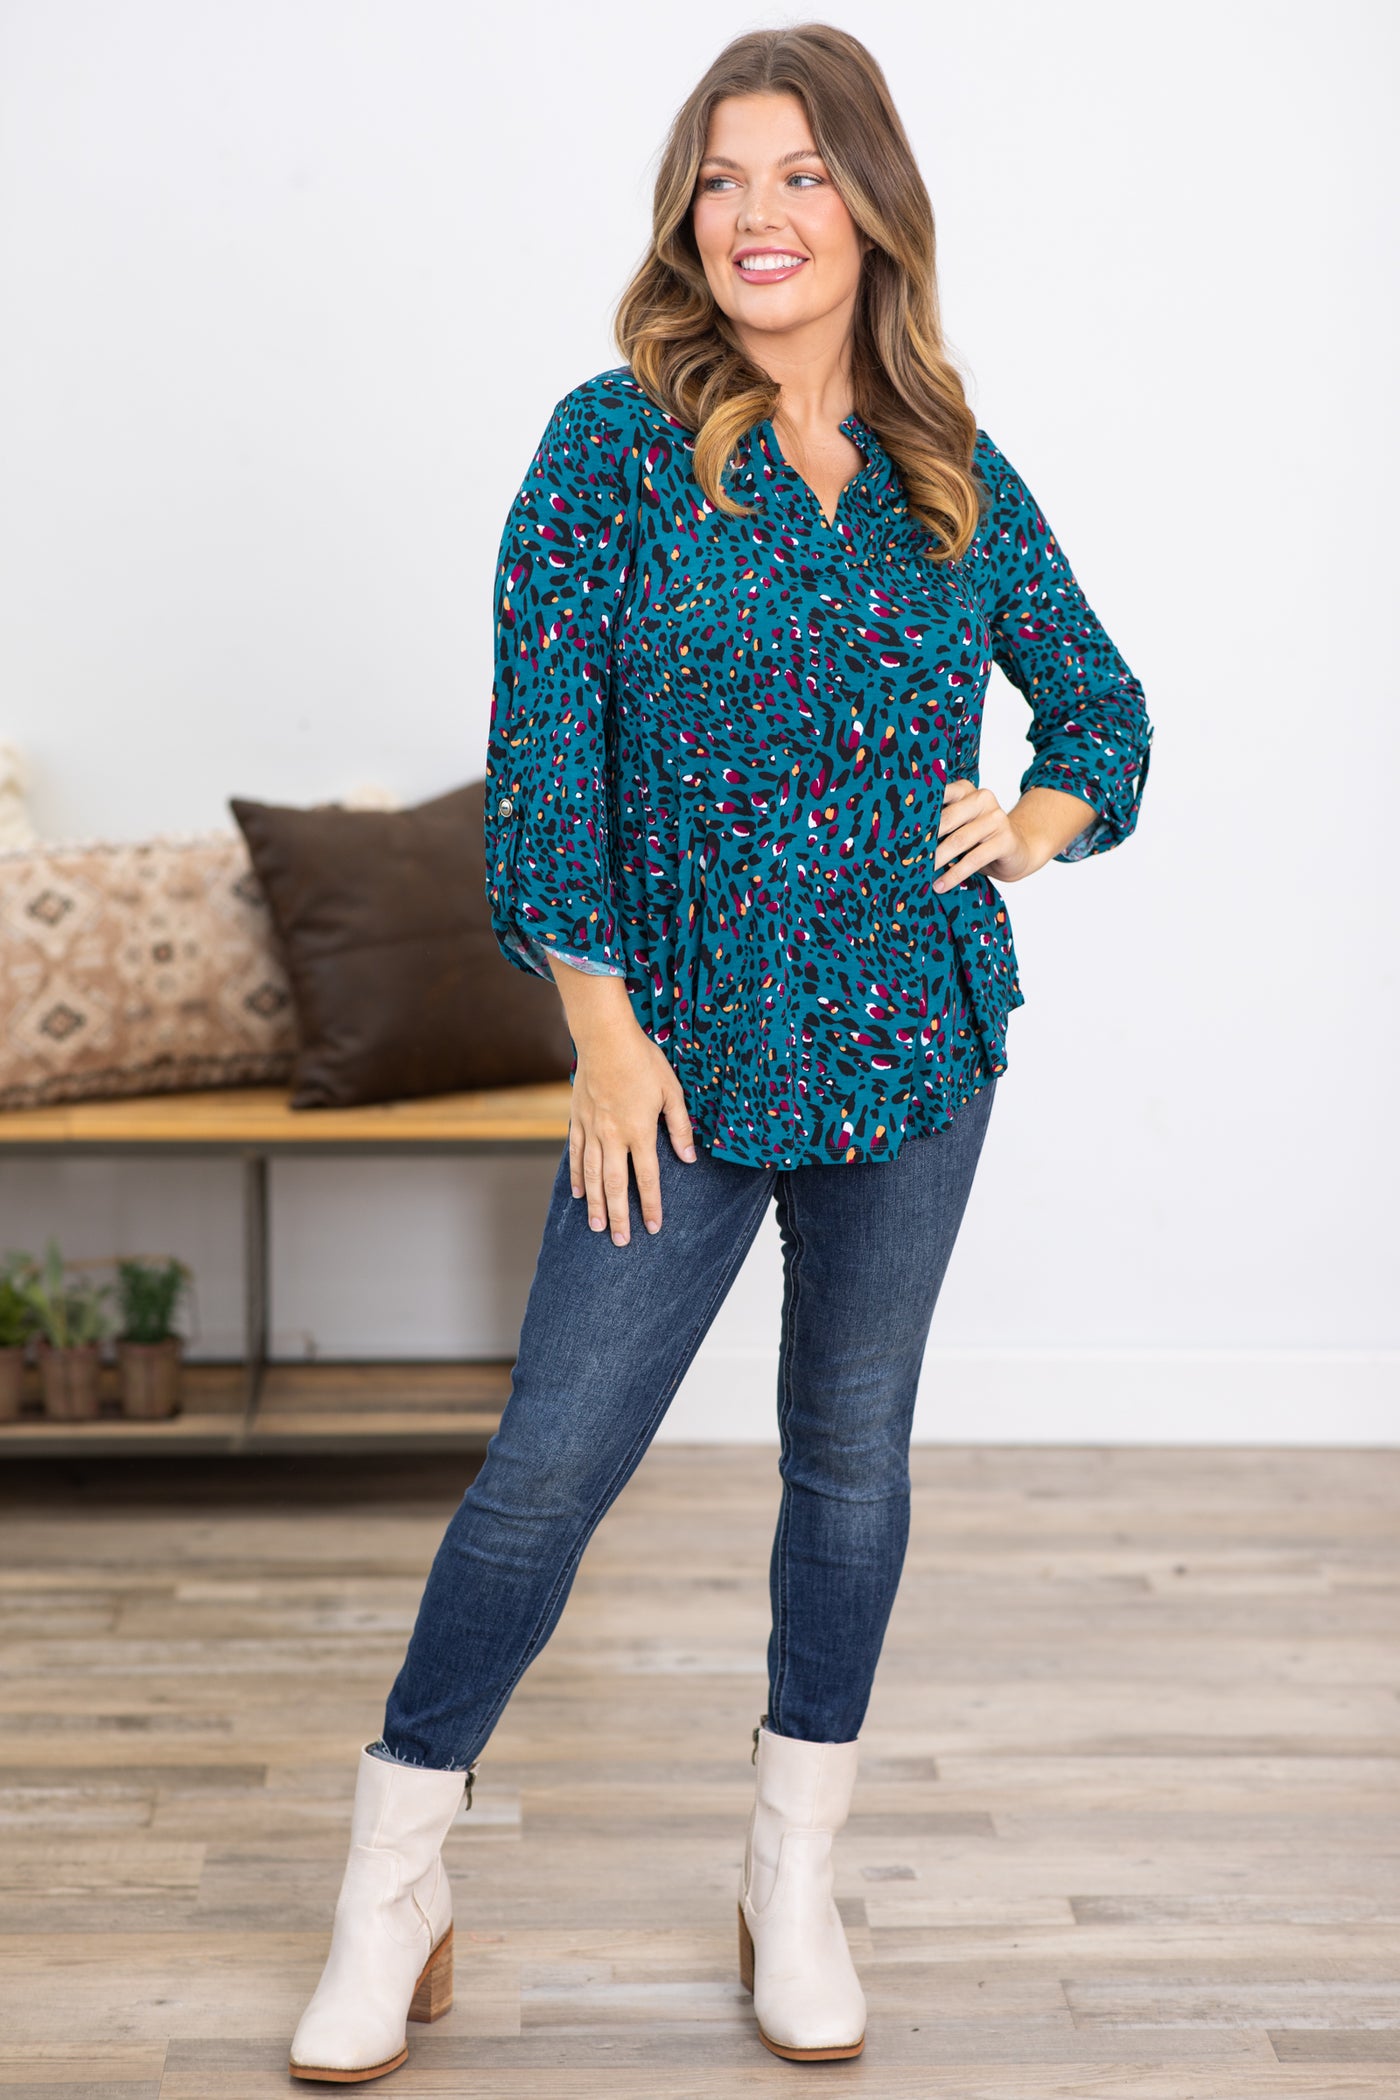 Teal and Berry Animal Print Top